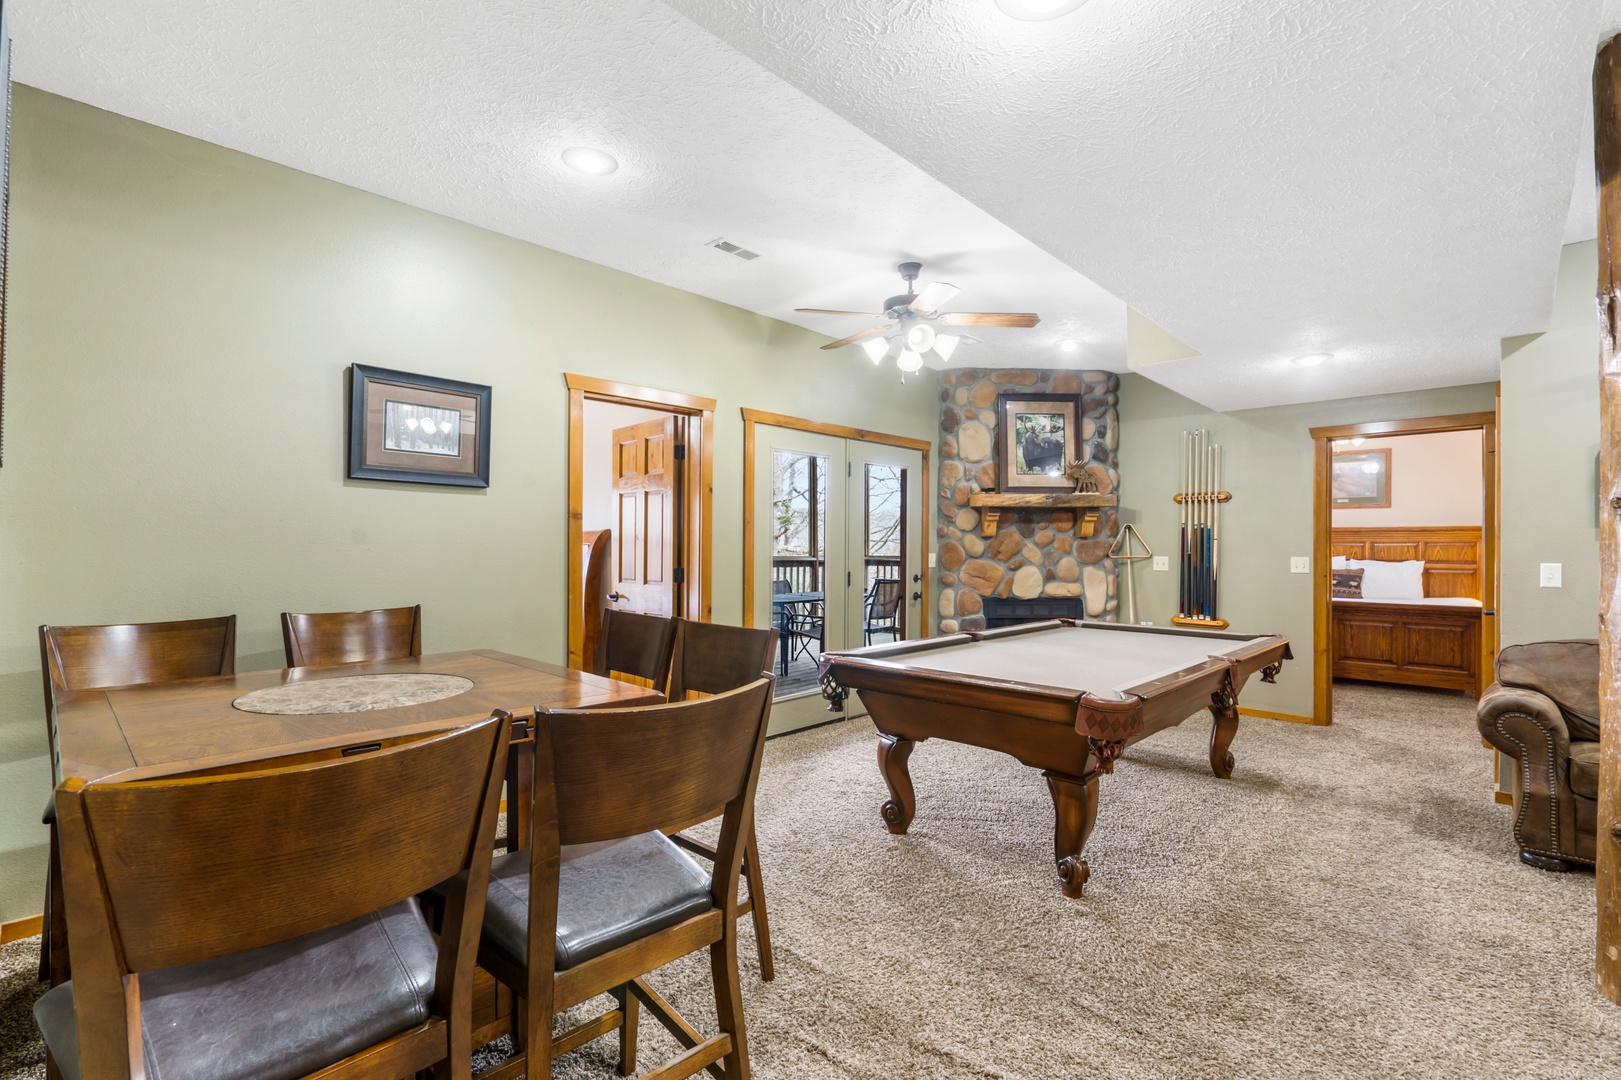 The lower-level game room, with 2 sleeper sofas, pool table, & gaming console